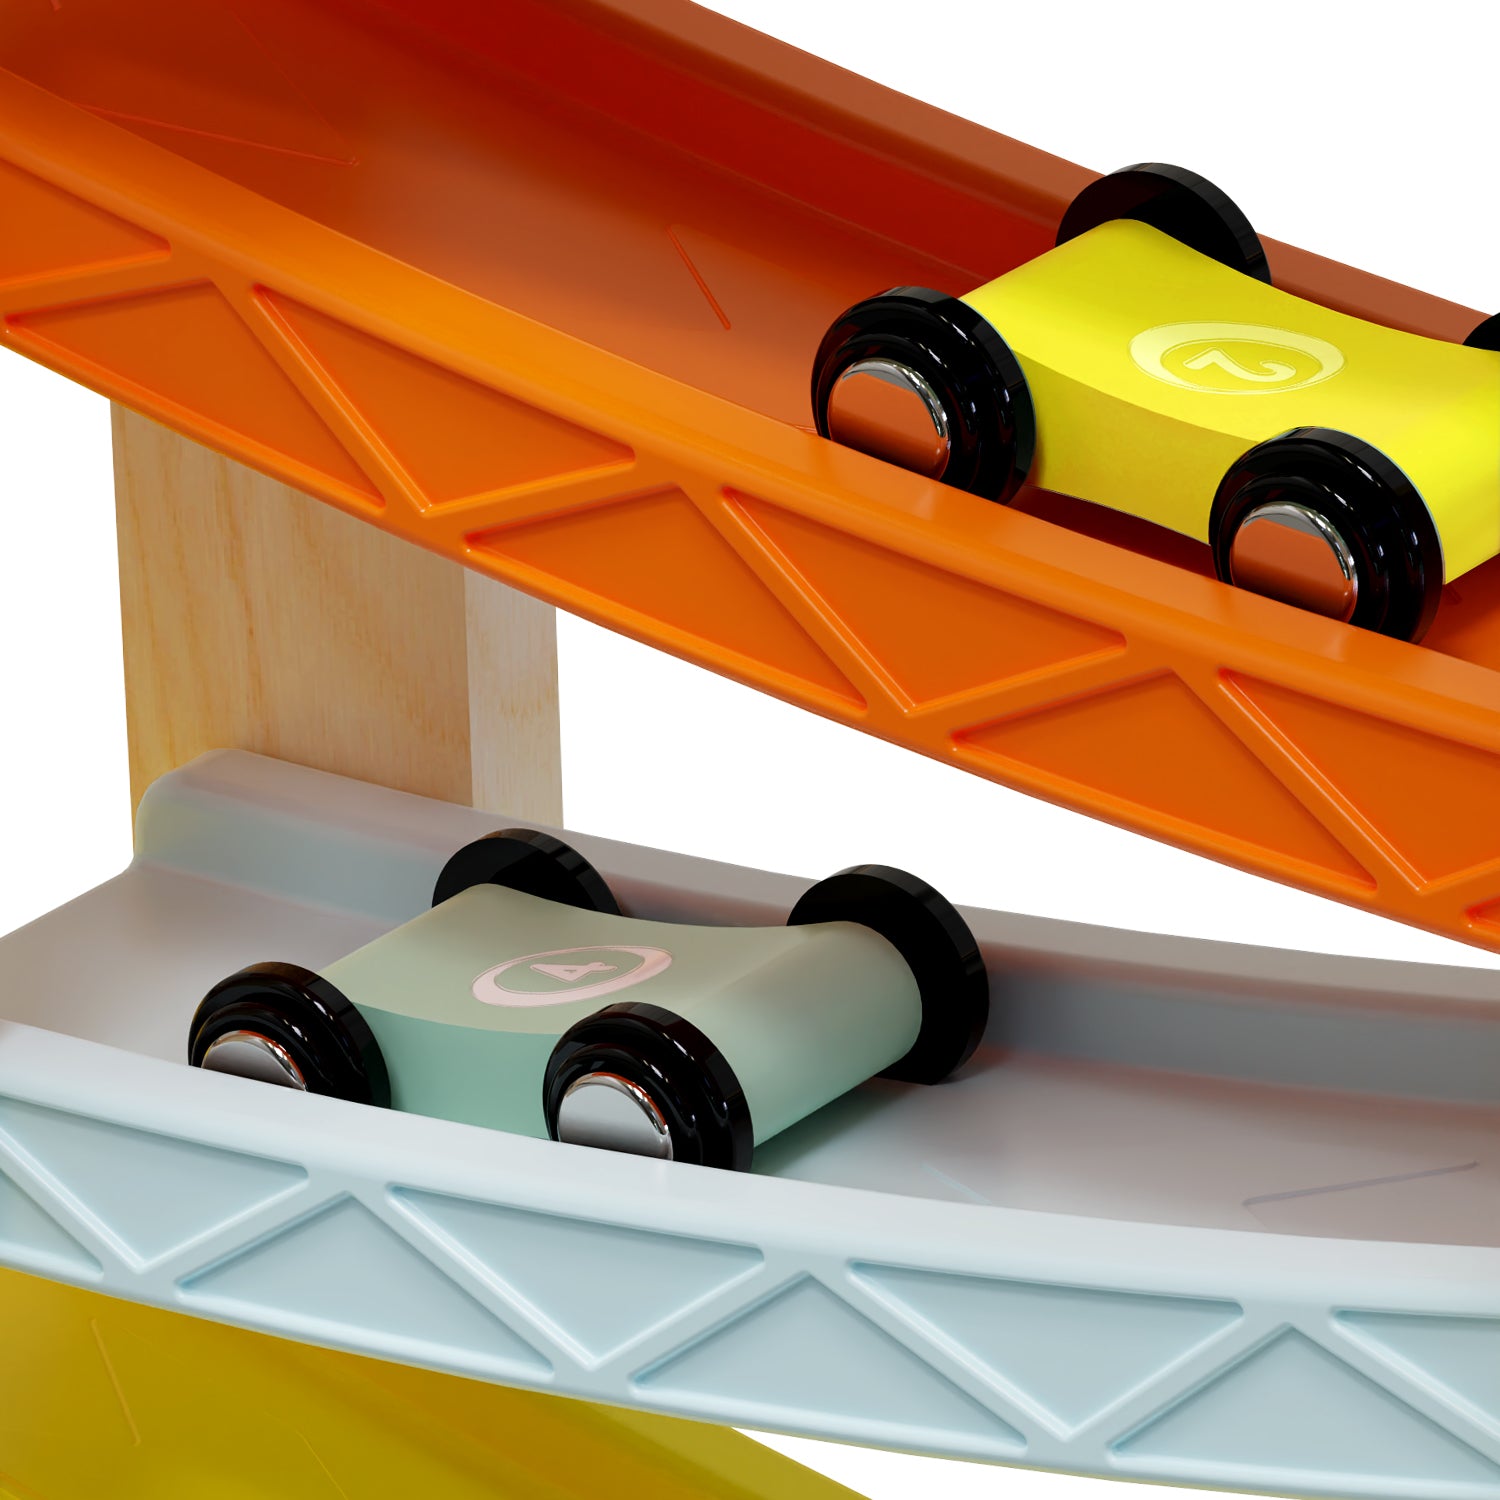 Ball track fun for little racers: The Car Racetrack with 4 cars just works like a ball track. Instead of balls, however, small wooden racing cars race down the track.